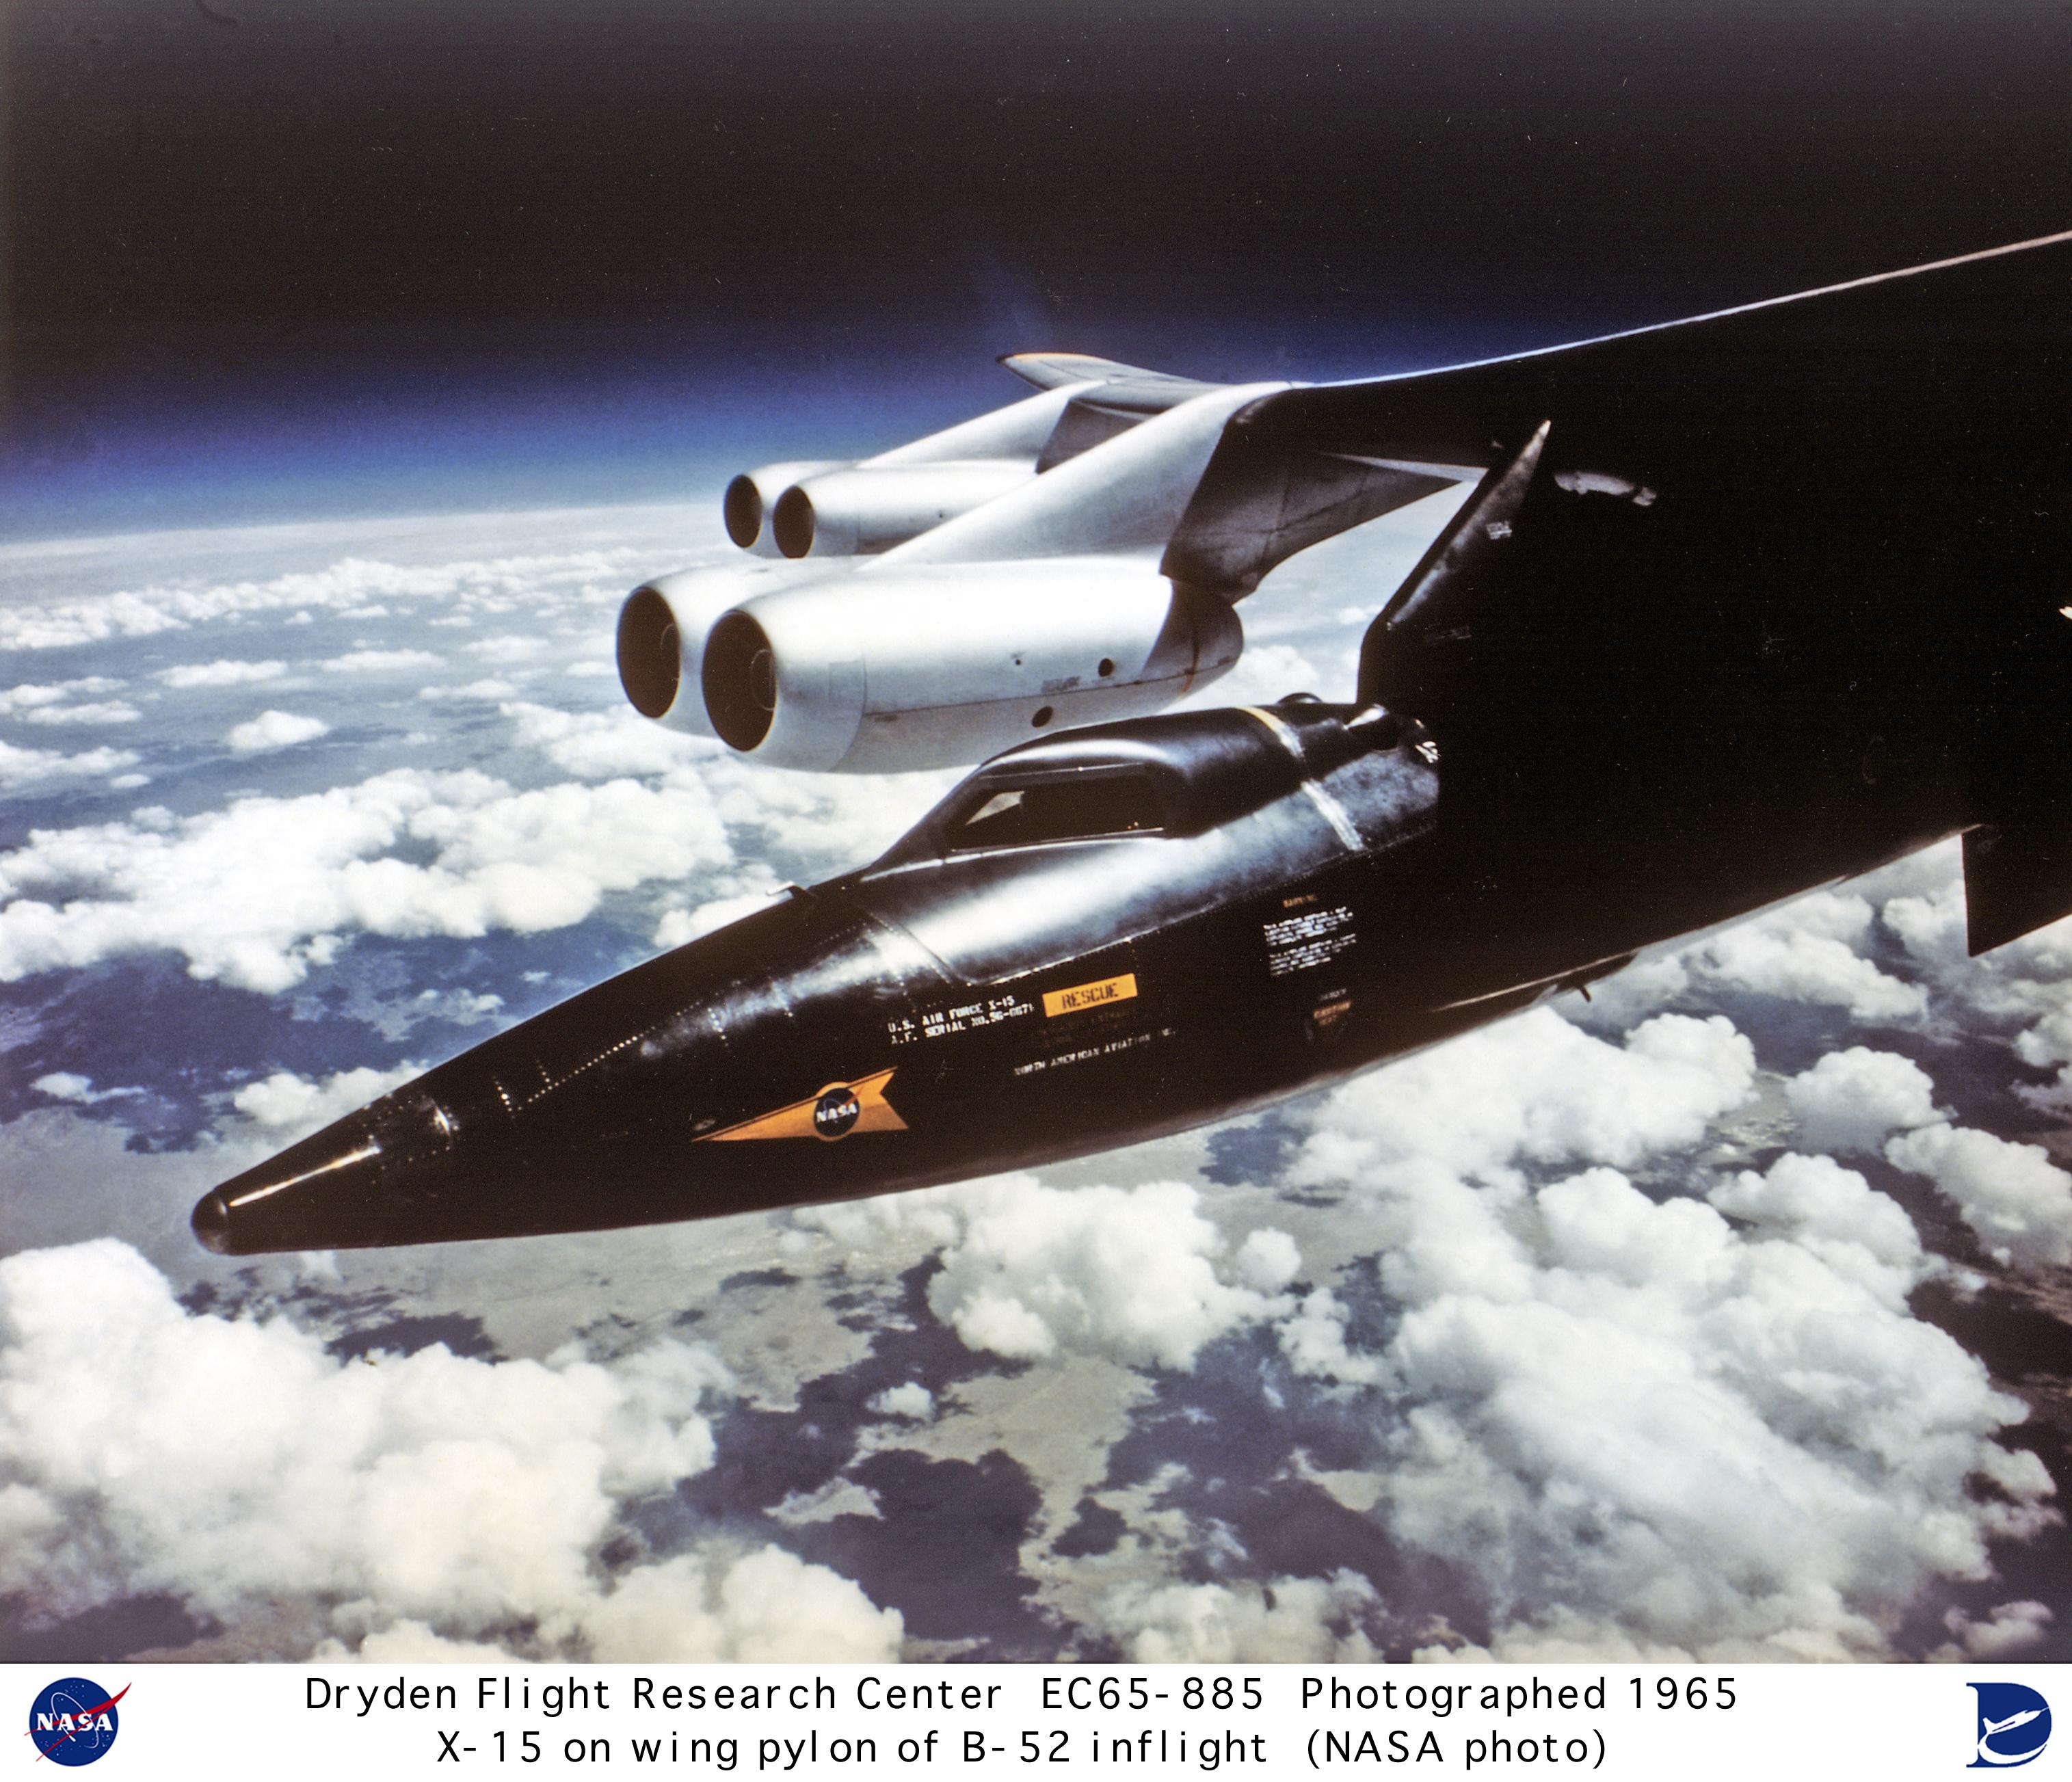 North American Aviation X-15 56-6671 under the right wing of a B-52 Stratofortress at 45,000 feet. (NASA)